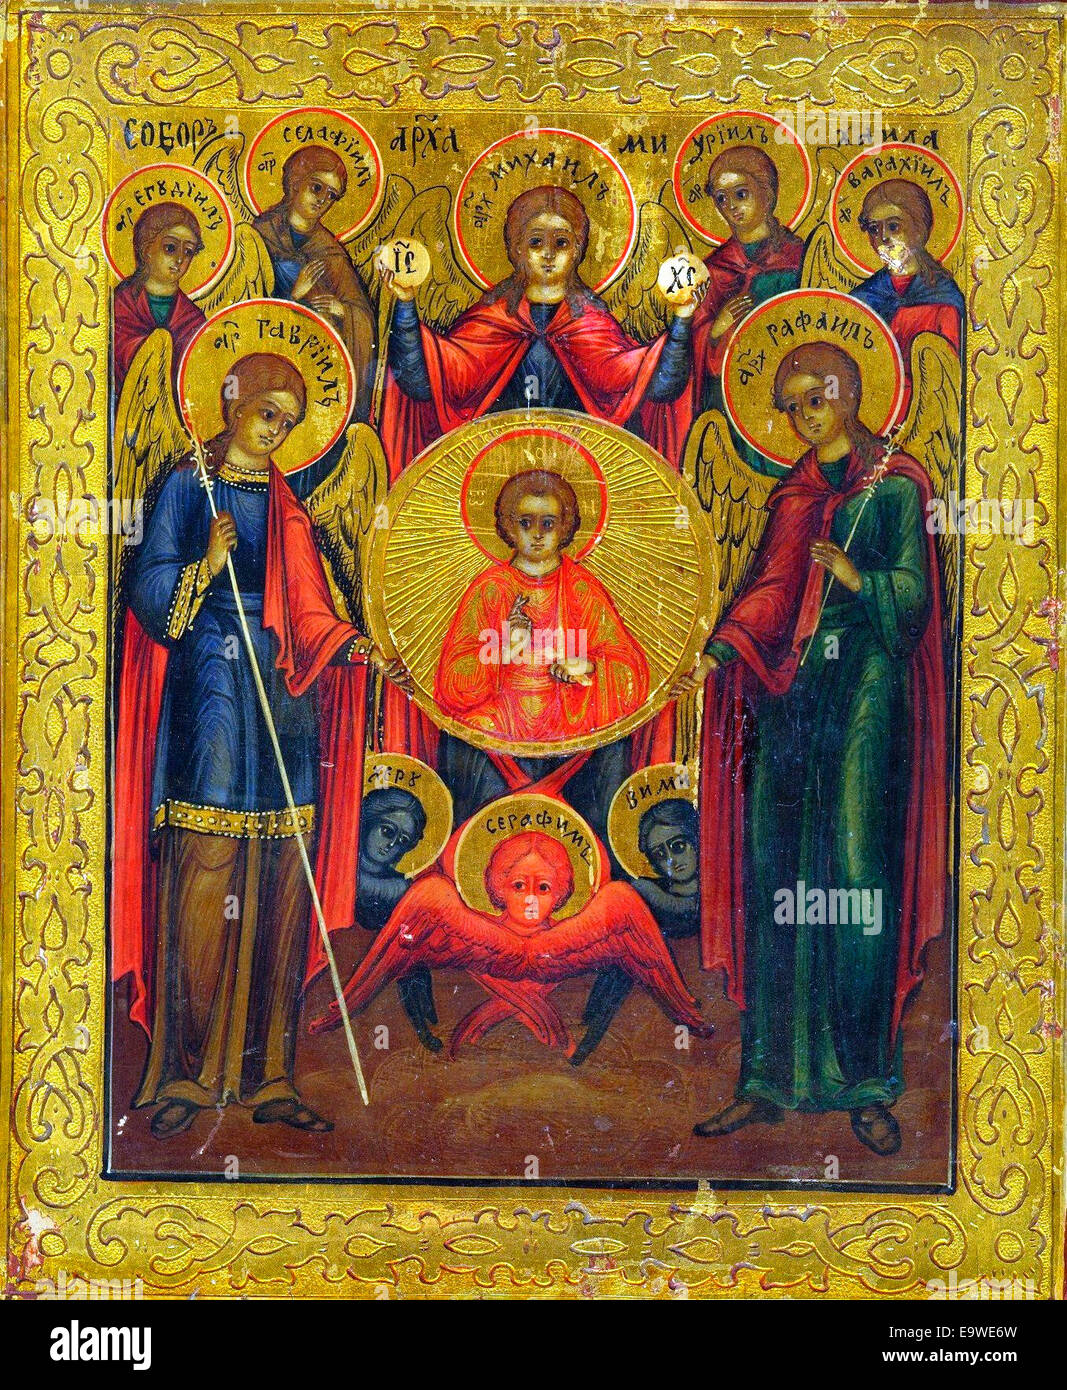 'Synaxis of the Archangel Michael' . An Eastern Orthodox Church icon of the 'Seven Archangels'. From left to right: Jegudiel, Gabriel, Selaphiel, Michael, Uriel, Raphael, Barachiel. Beneath the mandorla of Christ Emmanuel are representations of Cherubim (in blue) and Seraphim (in red). Stock Photo